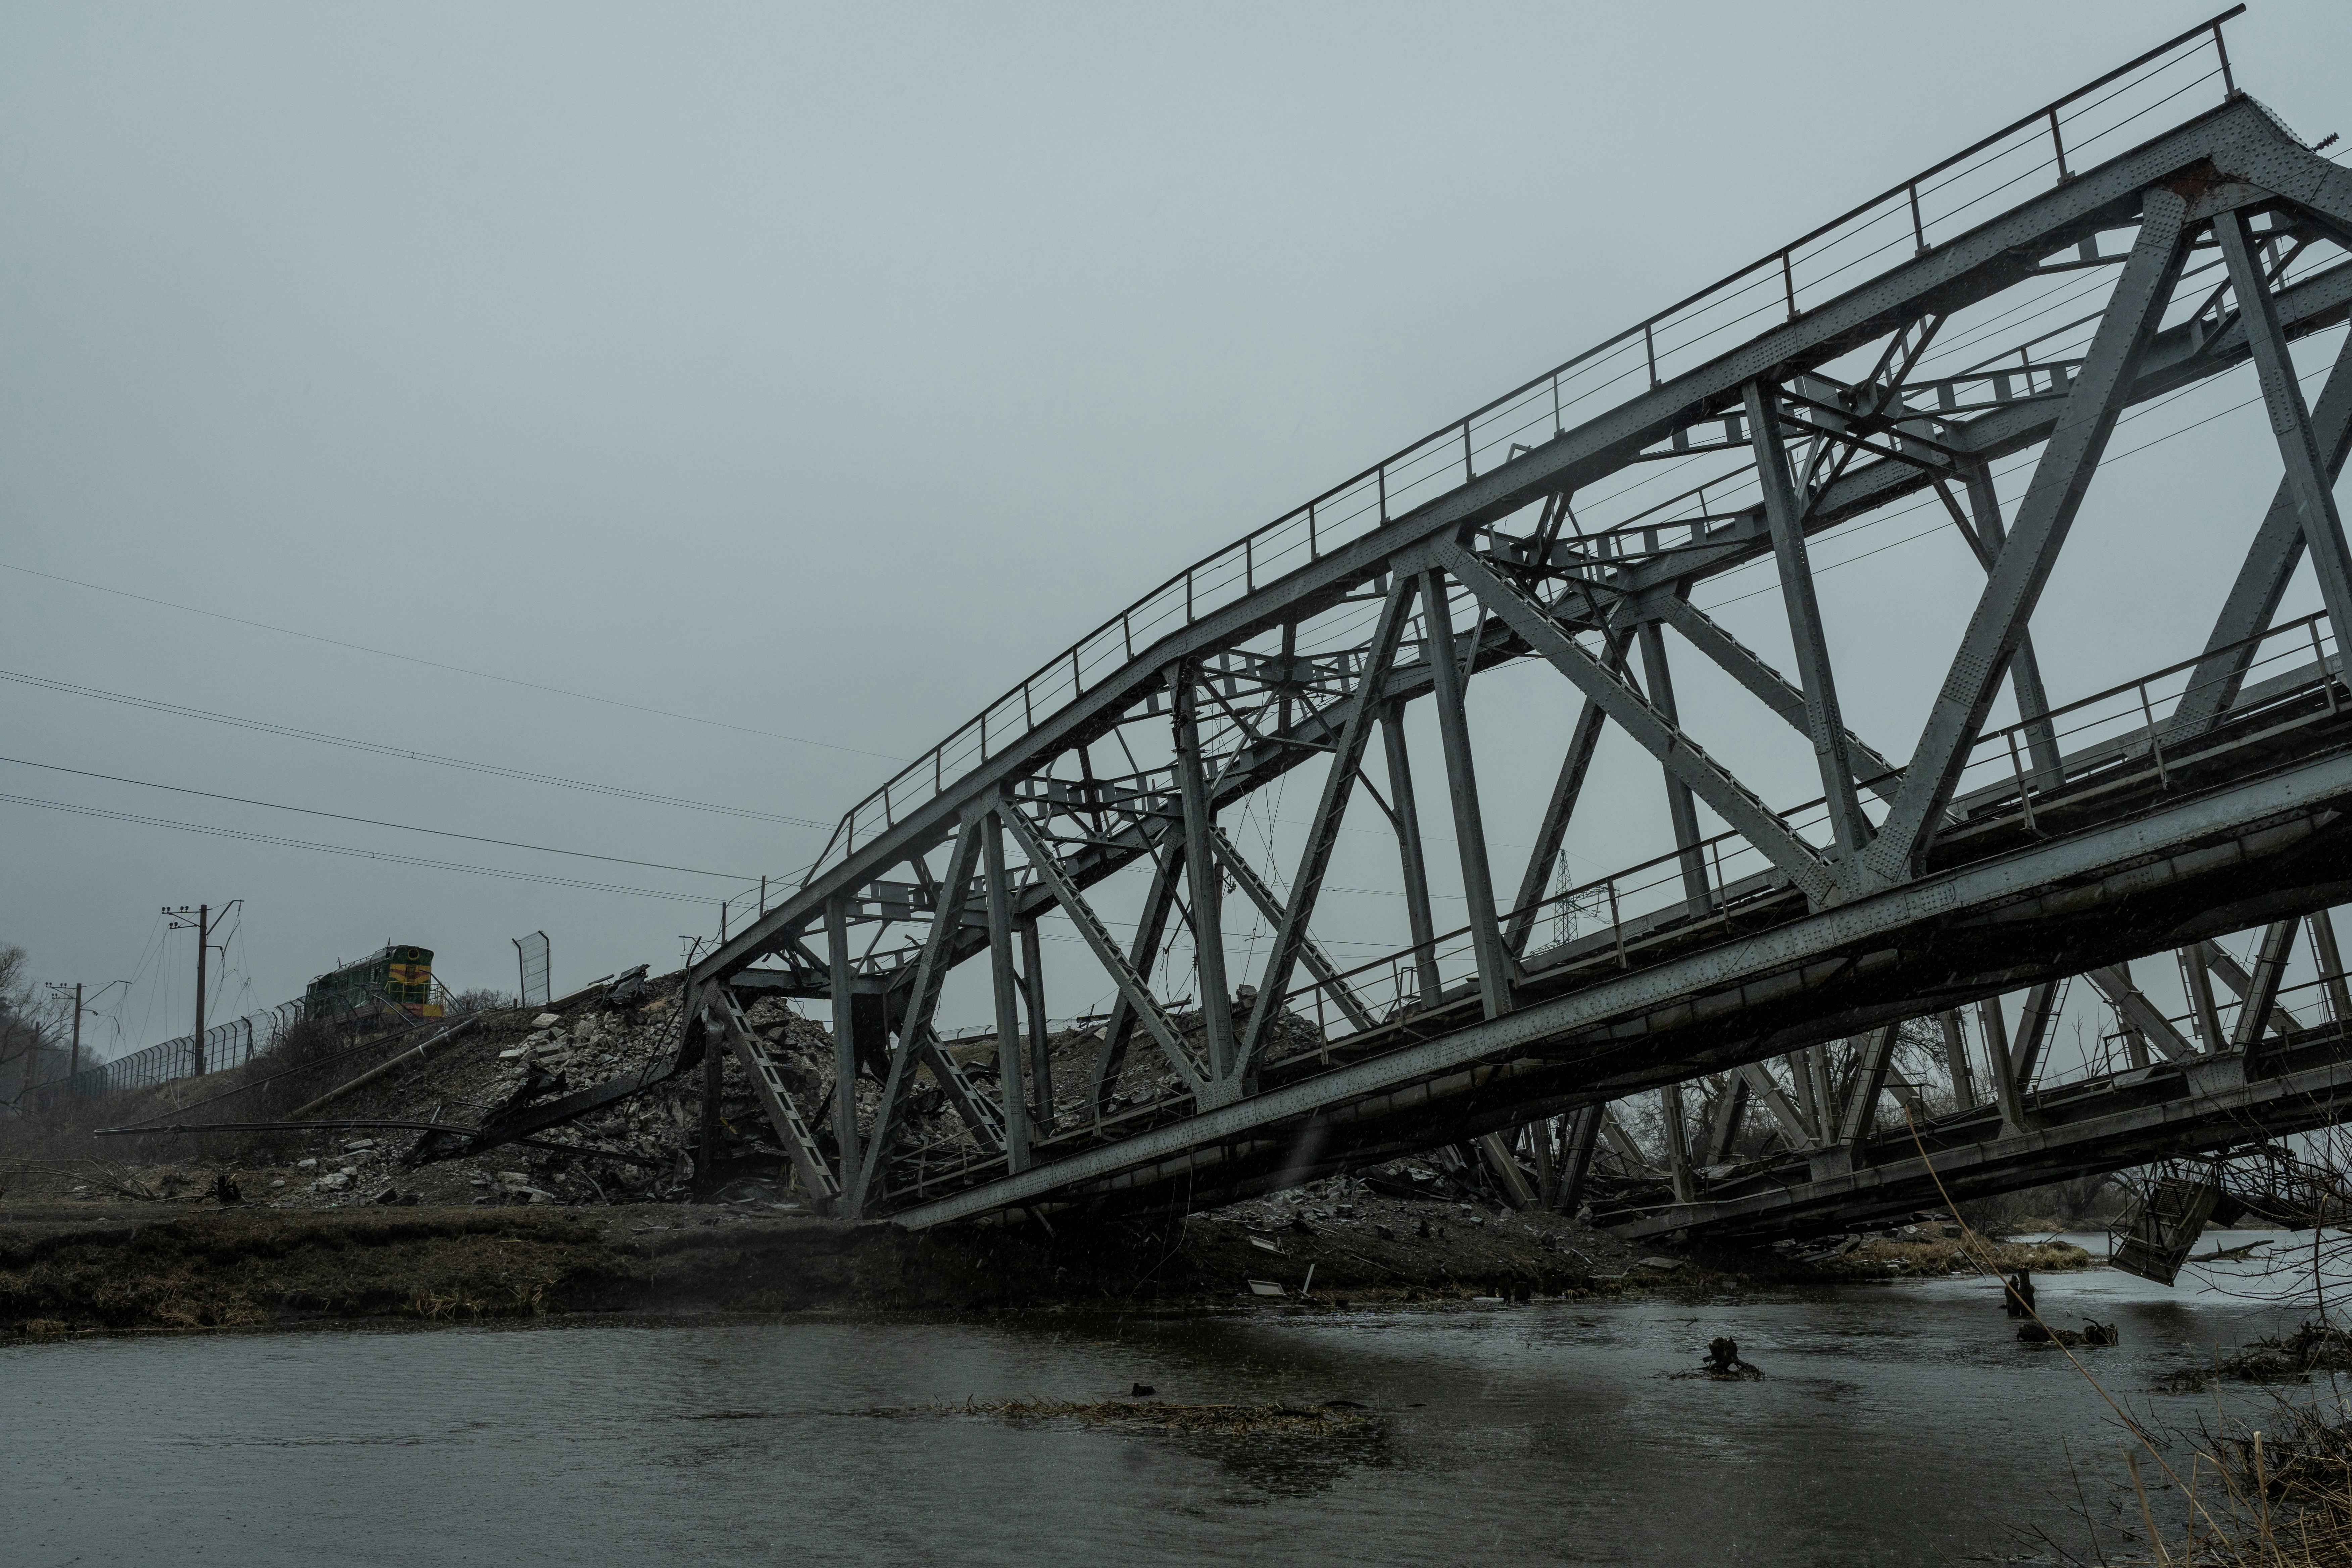 A view shows a railway bridge over the Irpin river destroyed by heavy shelling in Irpin